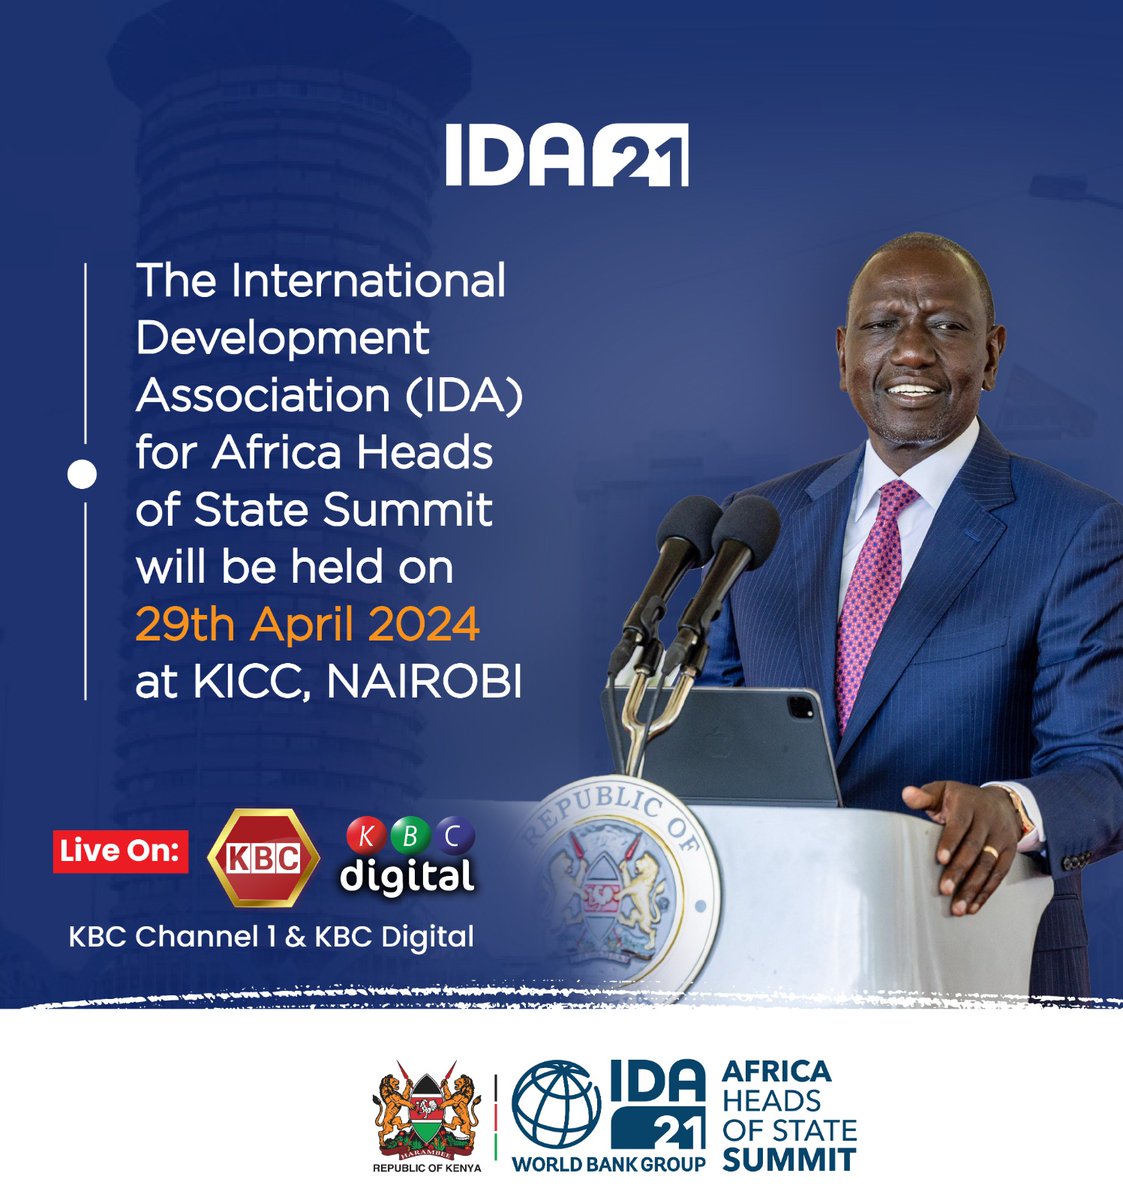 On 28th - 29th April, the Government of Kenya will be hosting African Heads of State and the World Bank to identify key priorities for financing in Africa and champion an ambitious financing replenishment of IDA resources. #idaworks #ida21nairobi #kenya